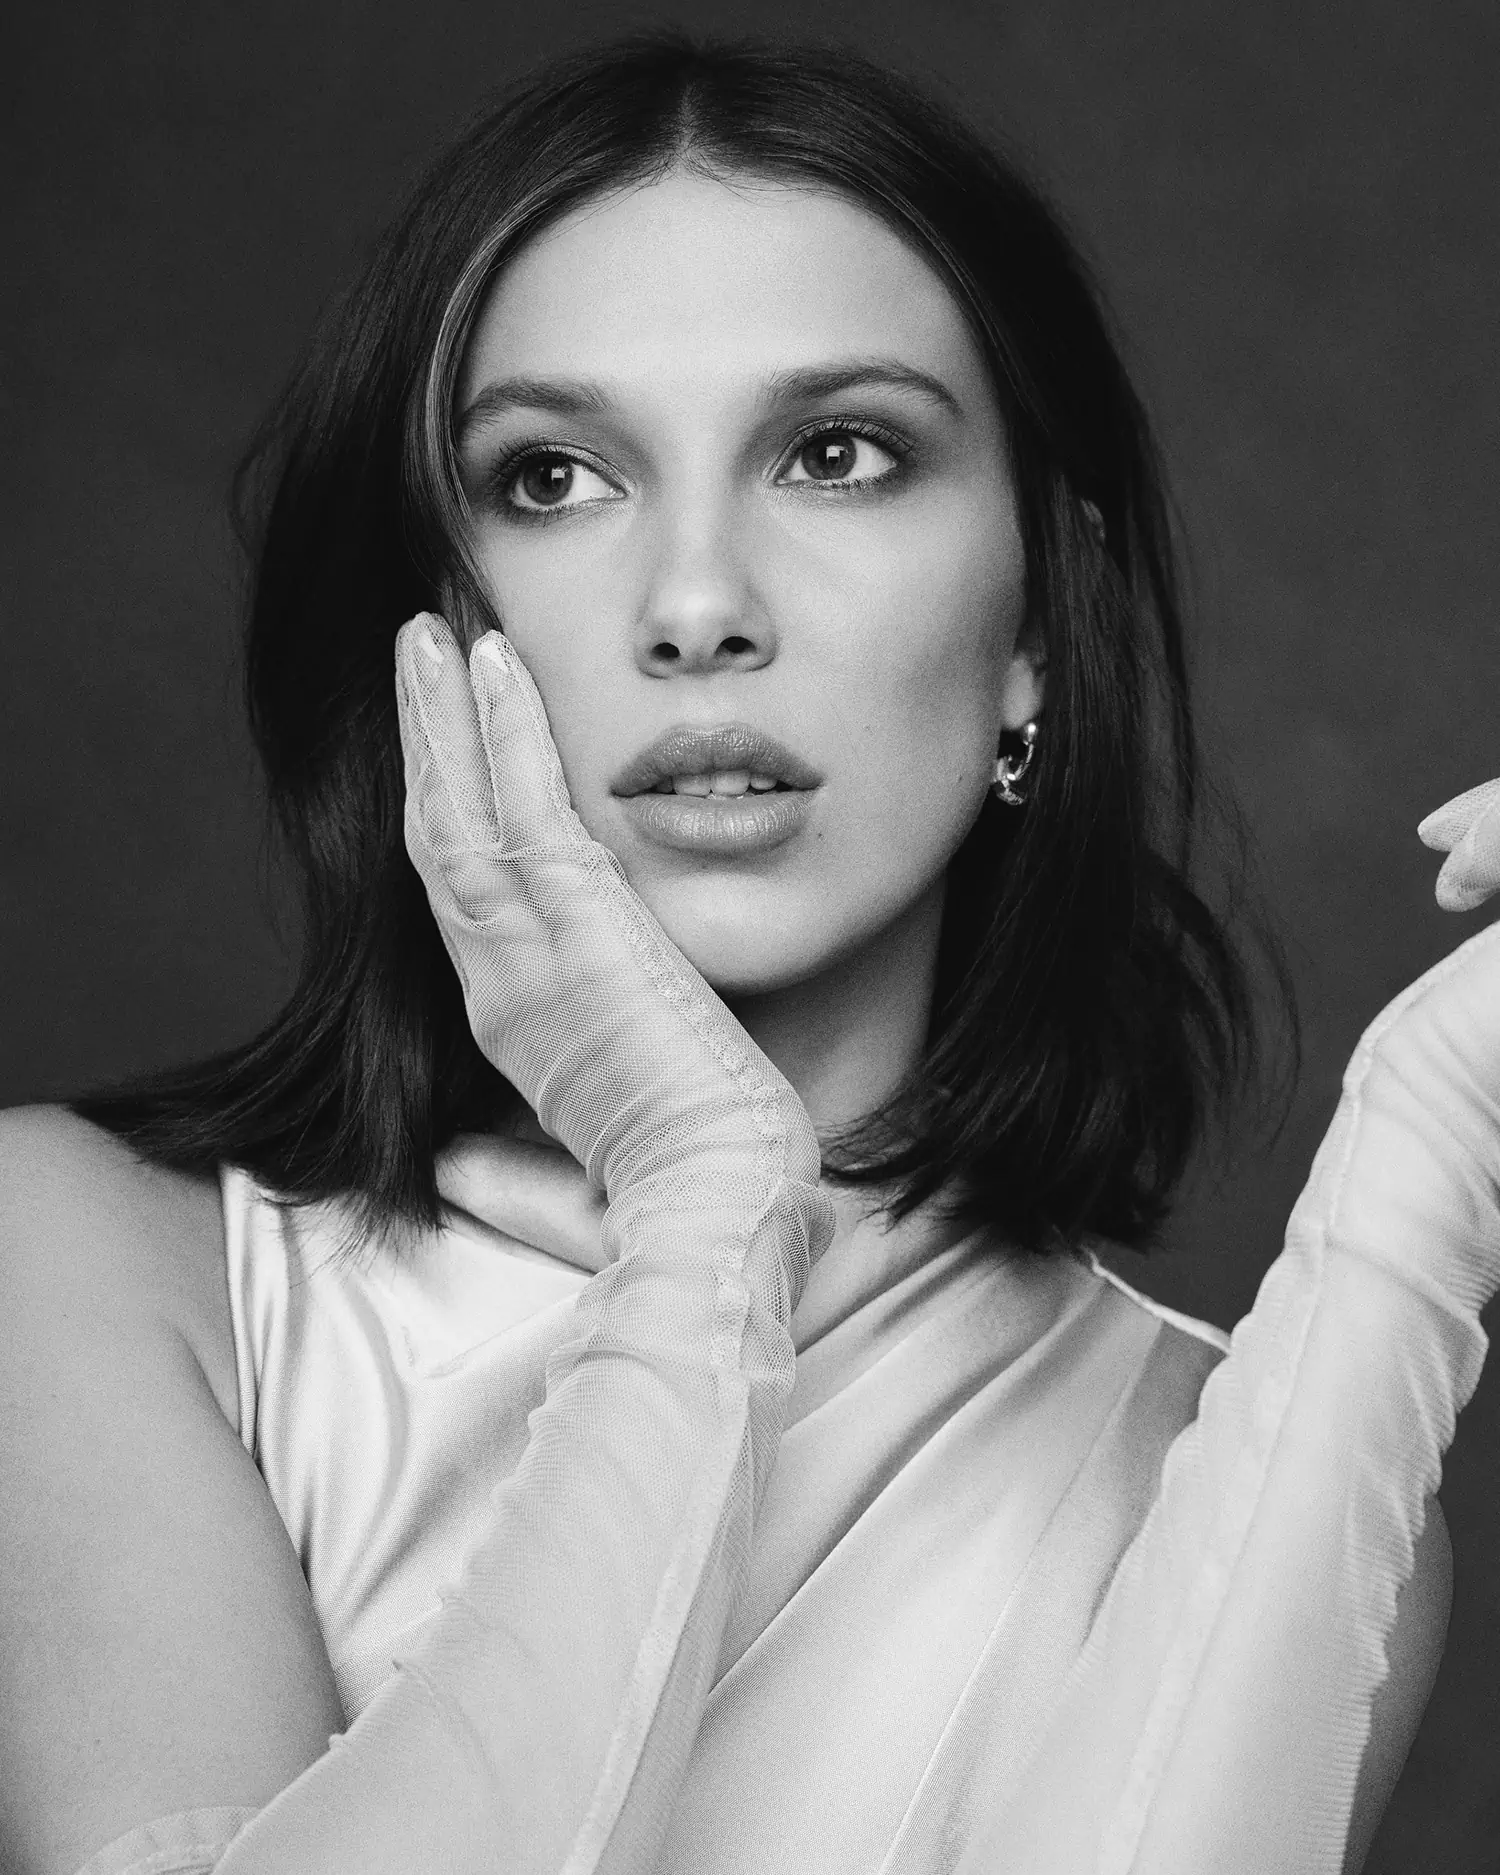 Millie Bobby Brown debuts her own fashion line, Florence by Mills Fashion